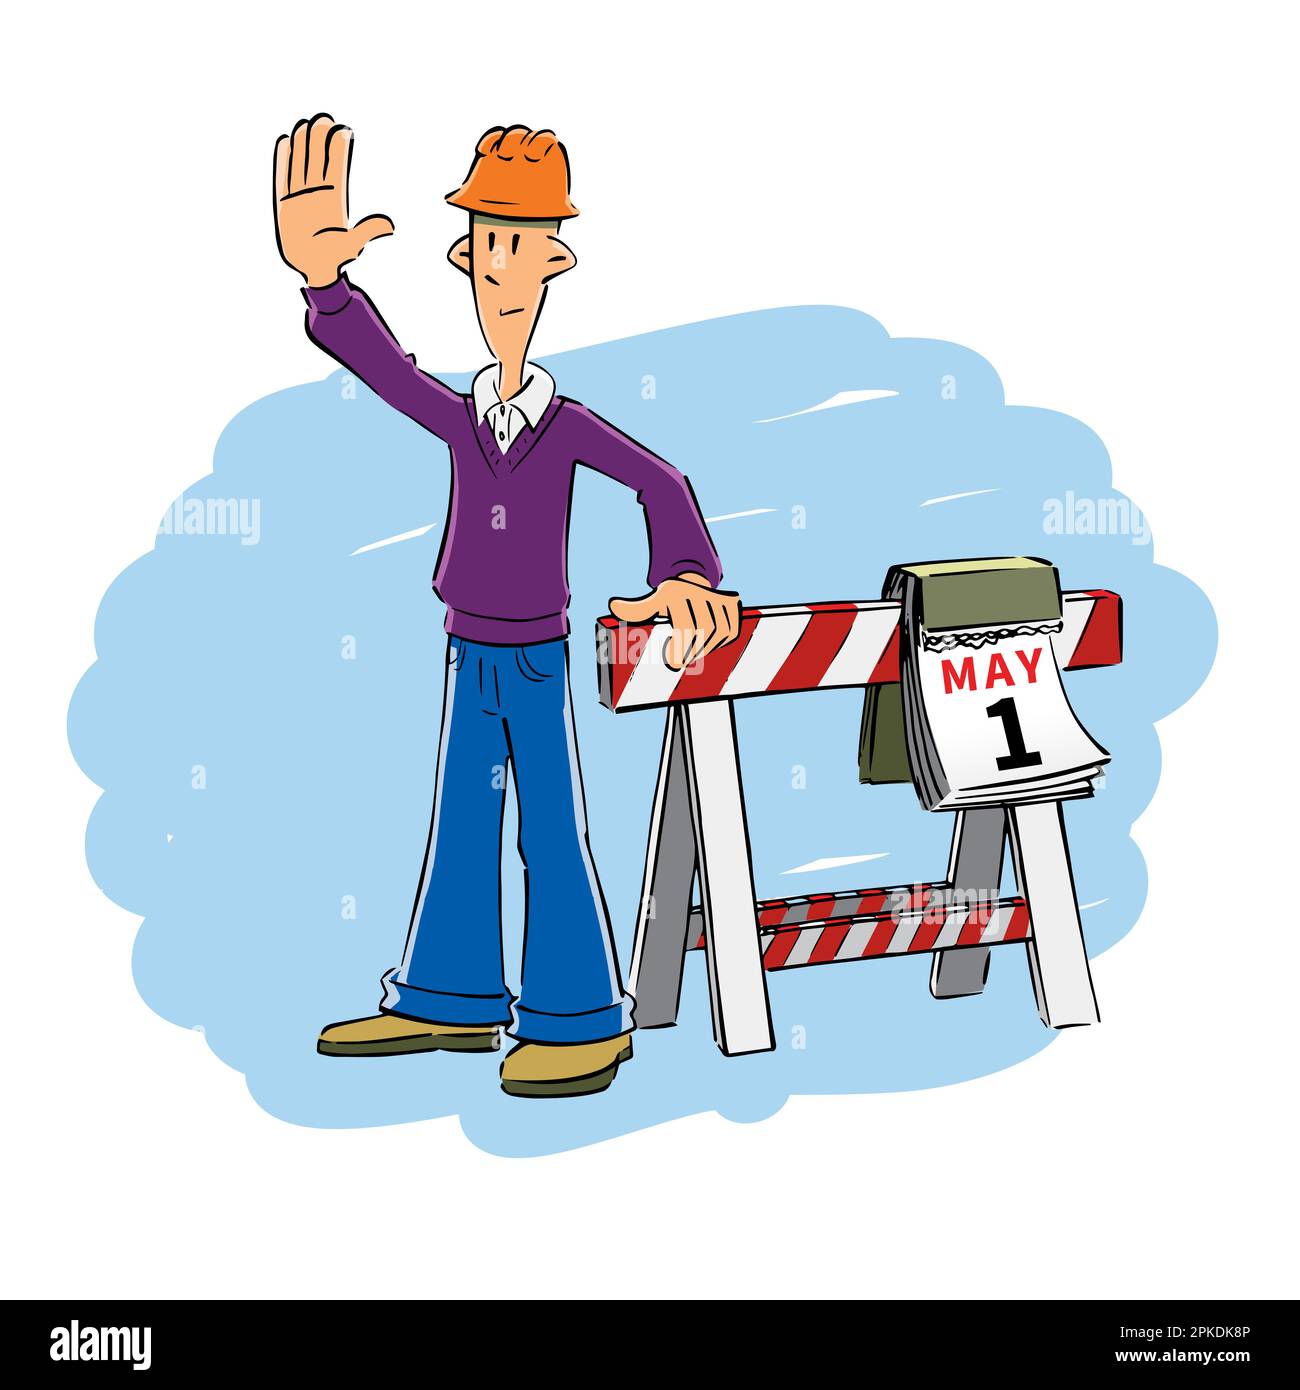 On May 1, I do not work. Construction worker celebrate International Labour Day. Happy Worker's Day concept. Flat style vector illustration Stock Vector